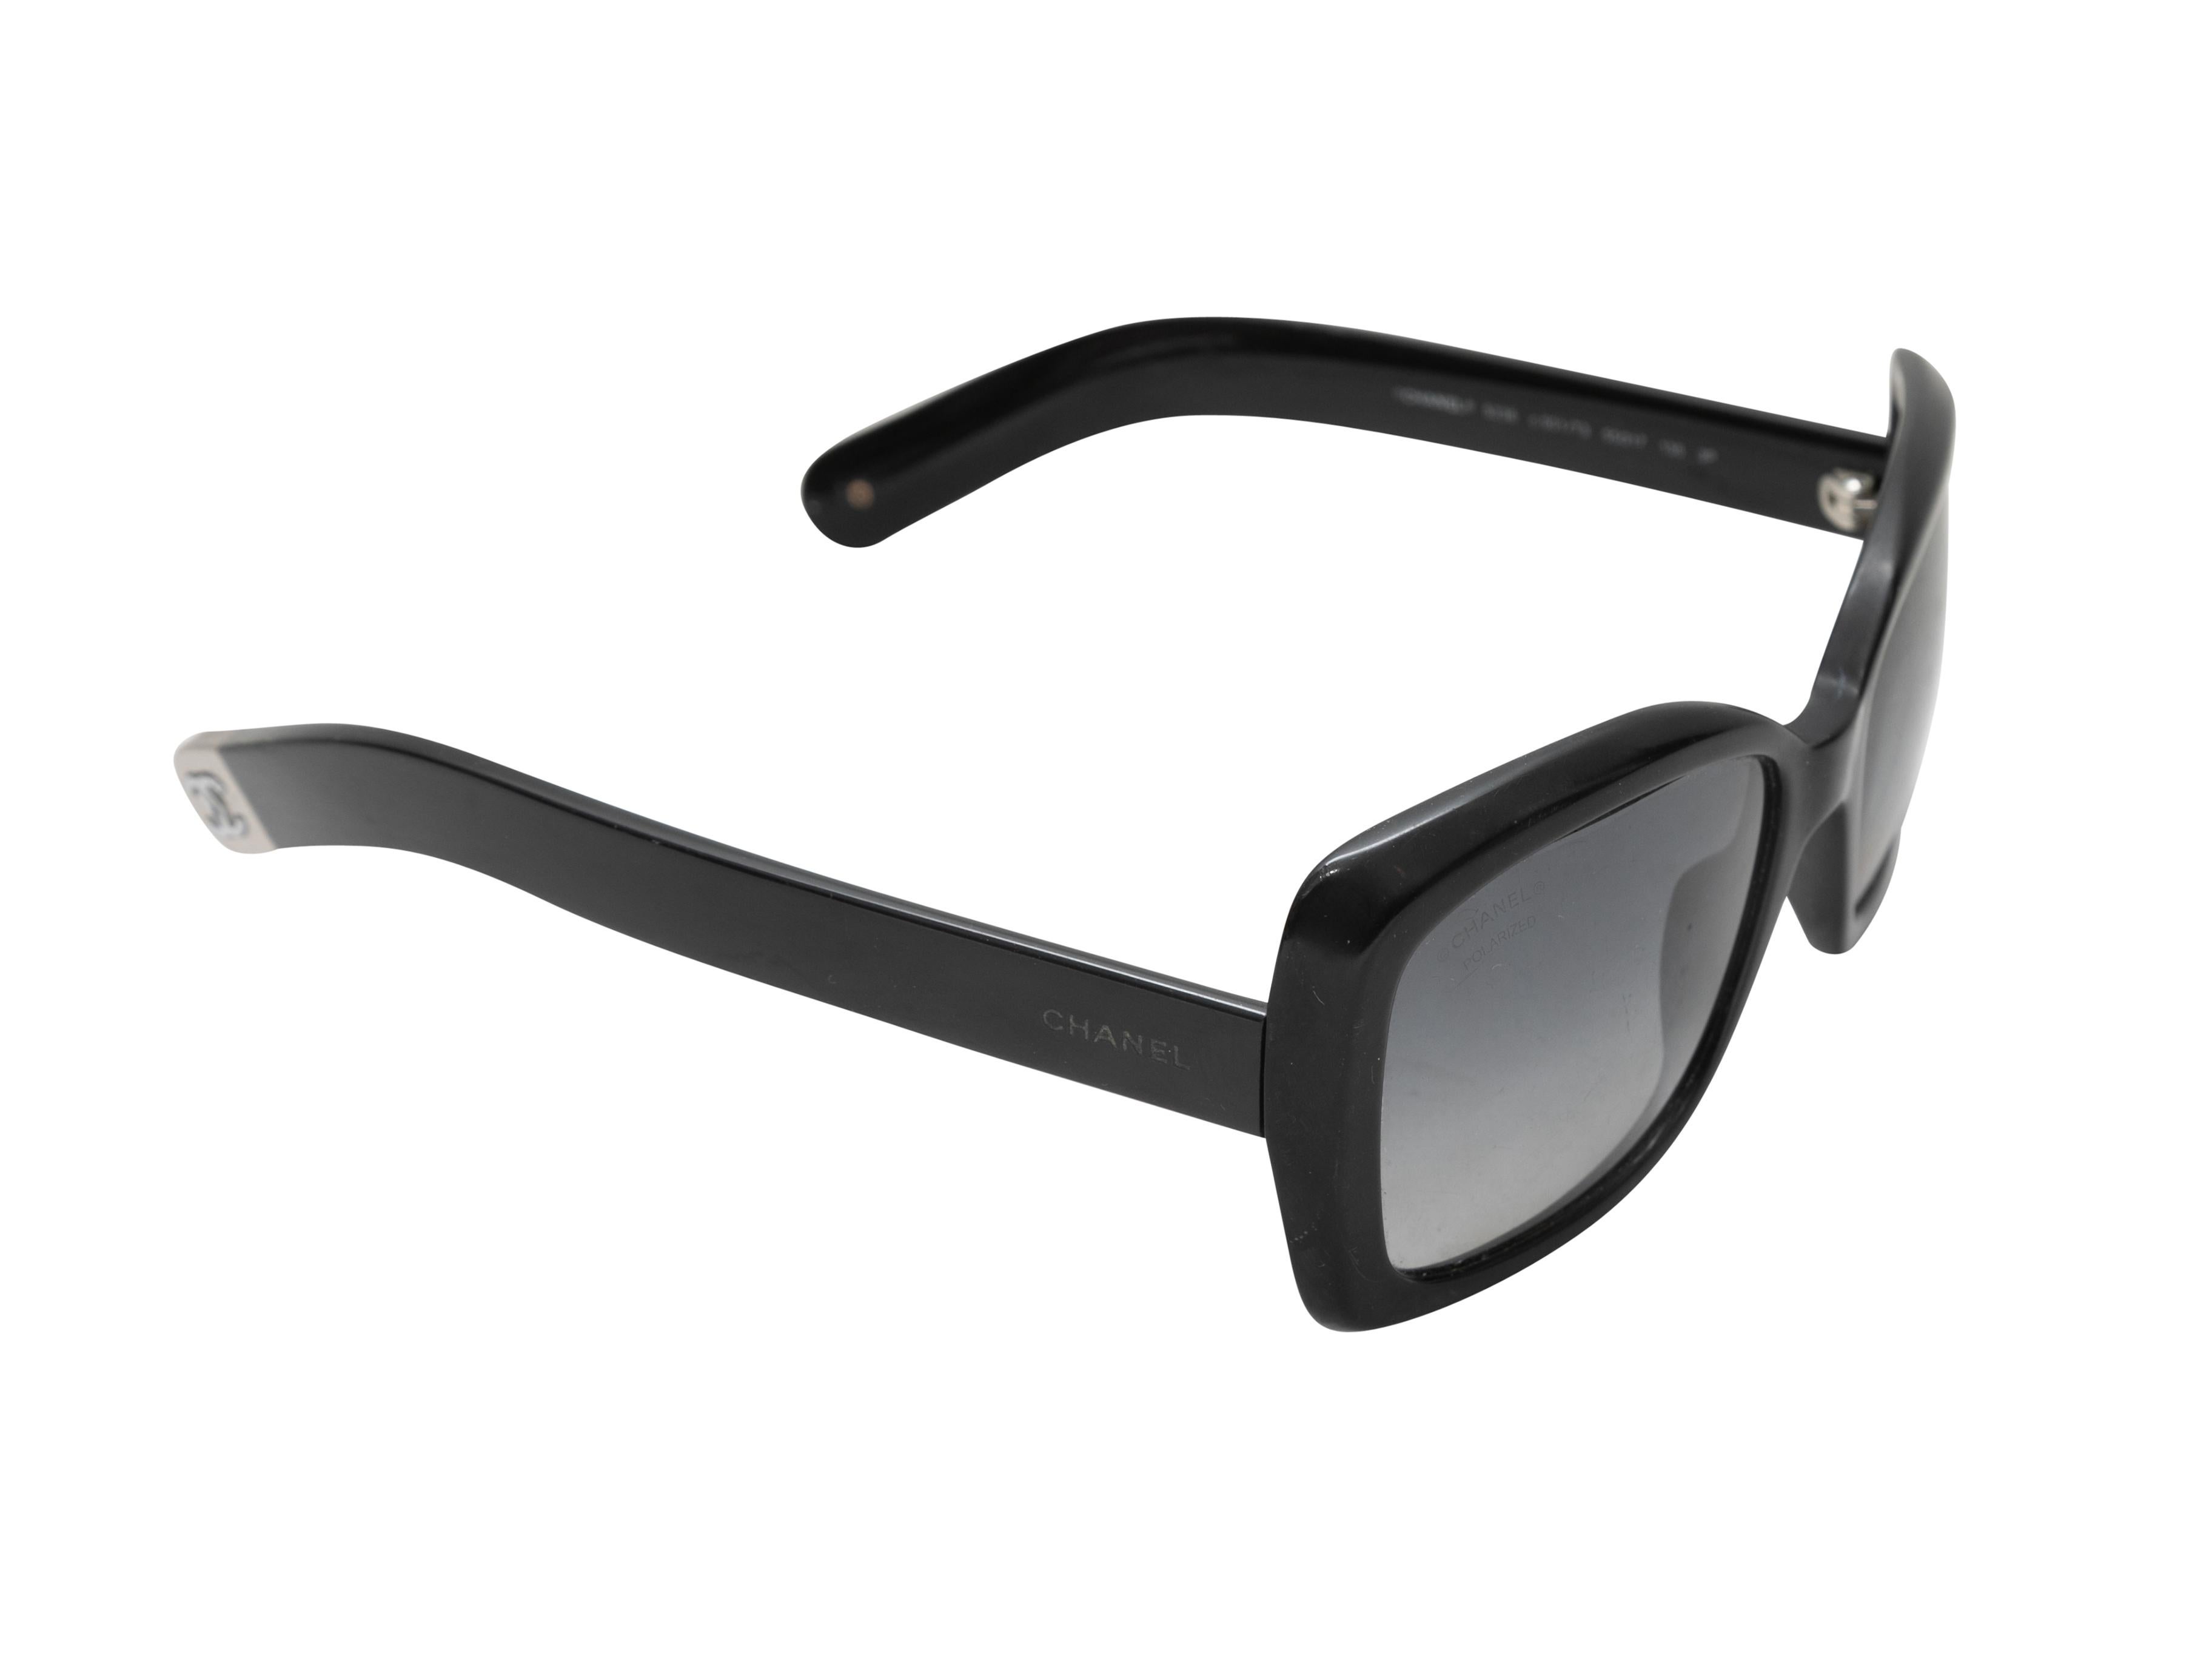 Black acetate oversized sunglasses by Chanel. Grey tinted lenses. 2